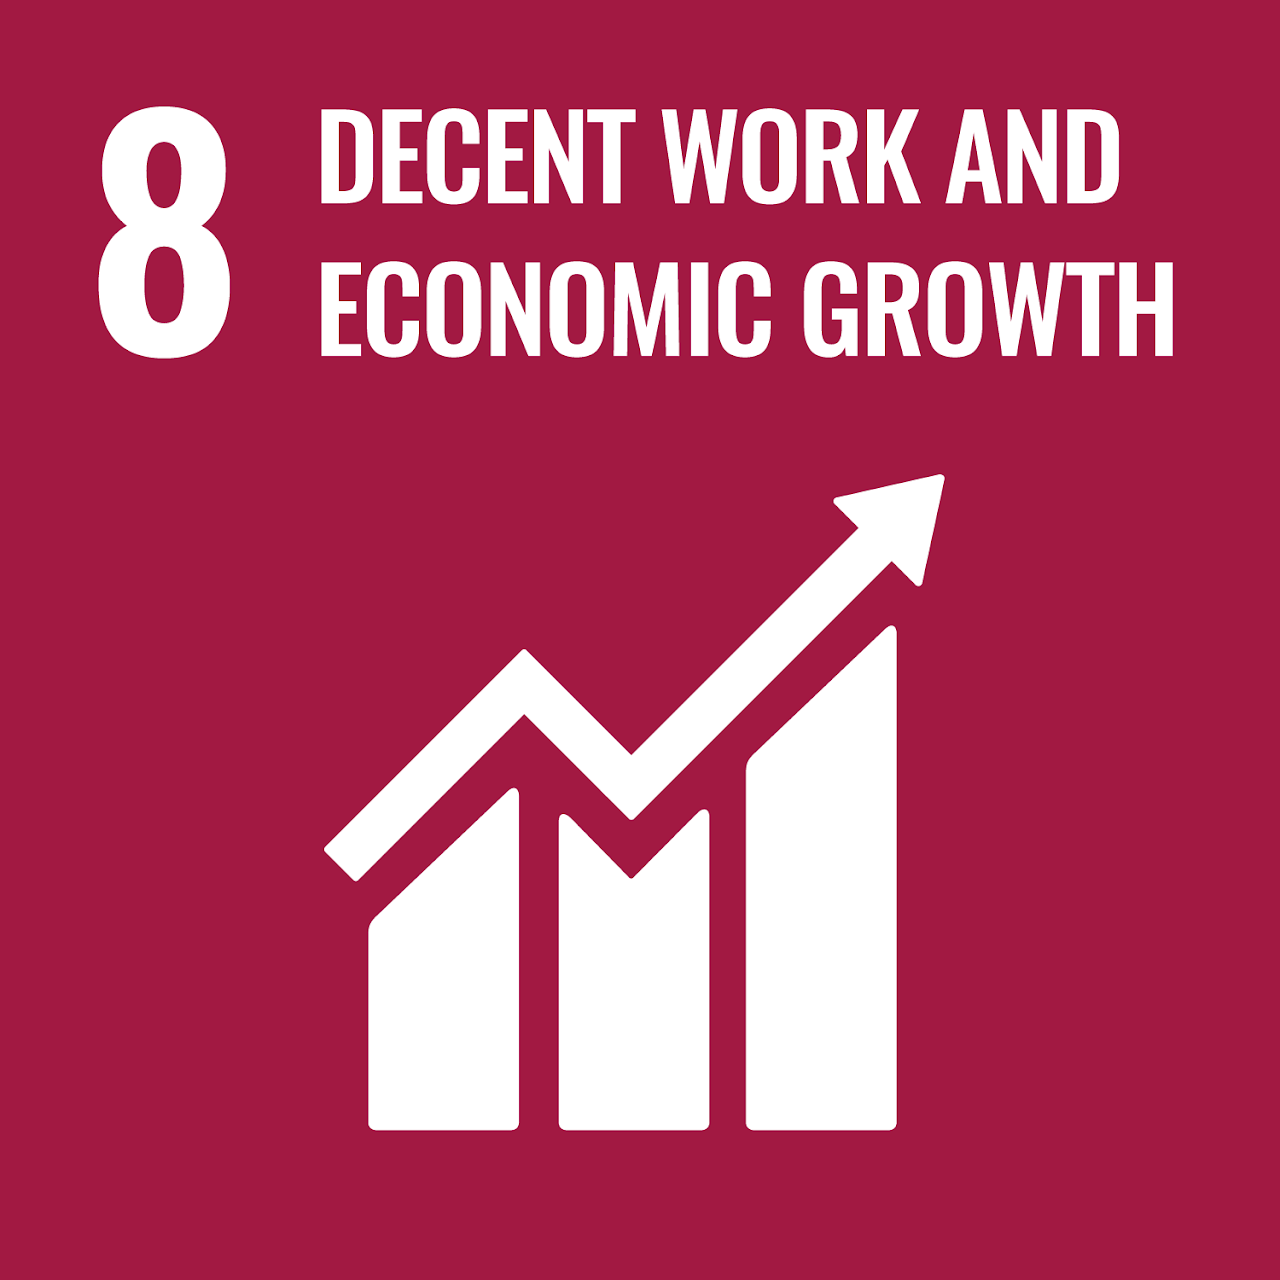 8° - Decent Work and Economic Growth